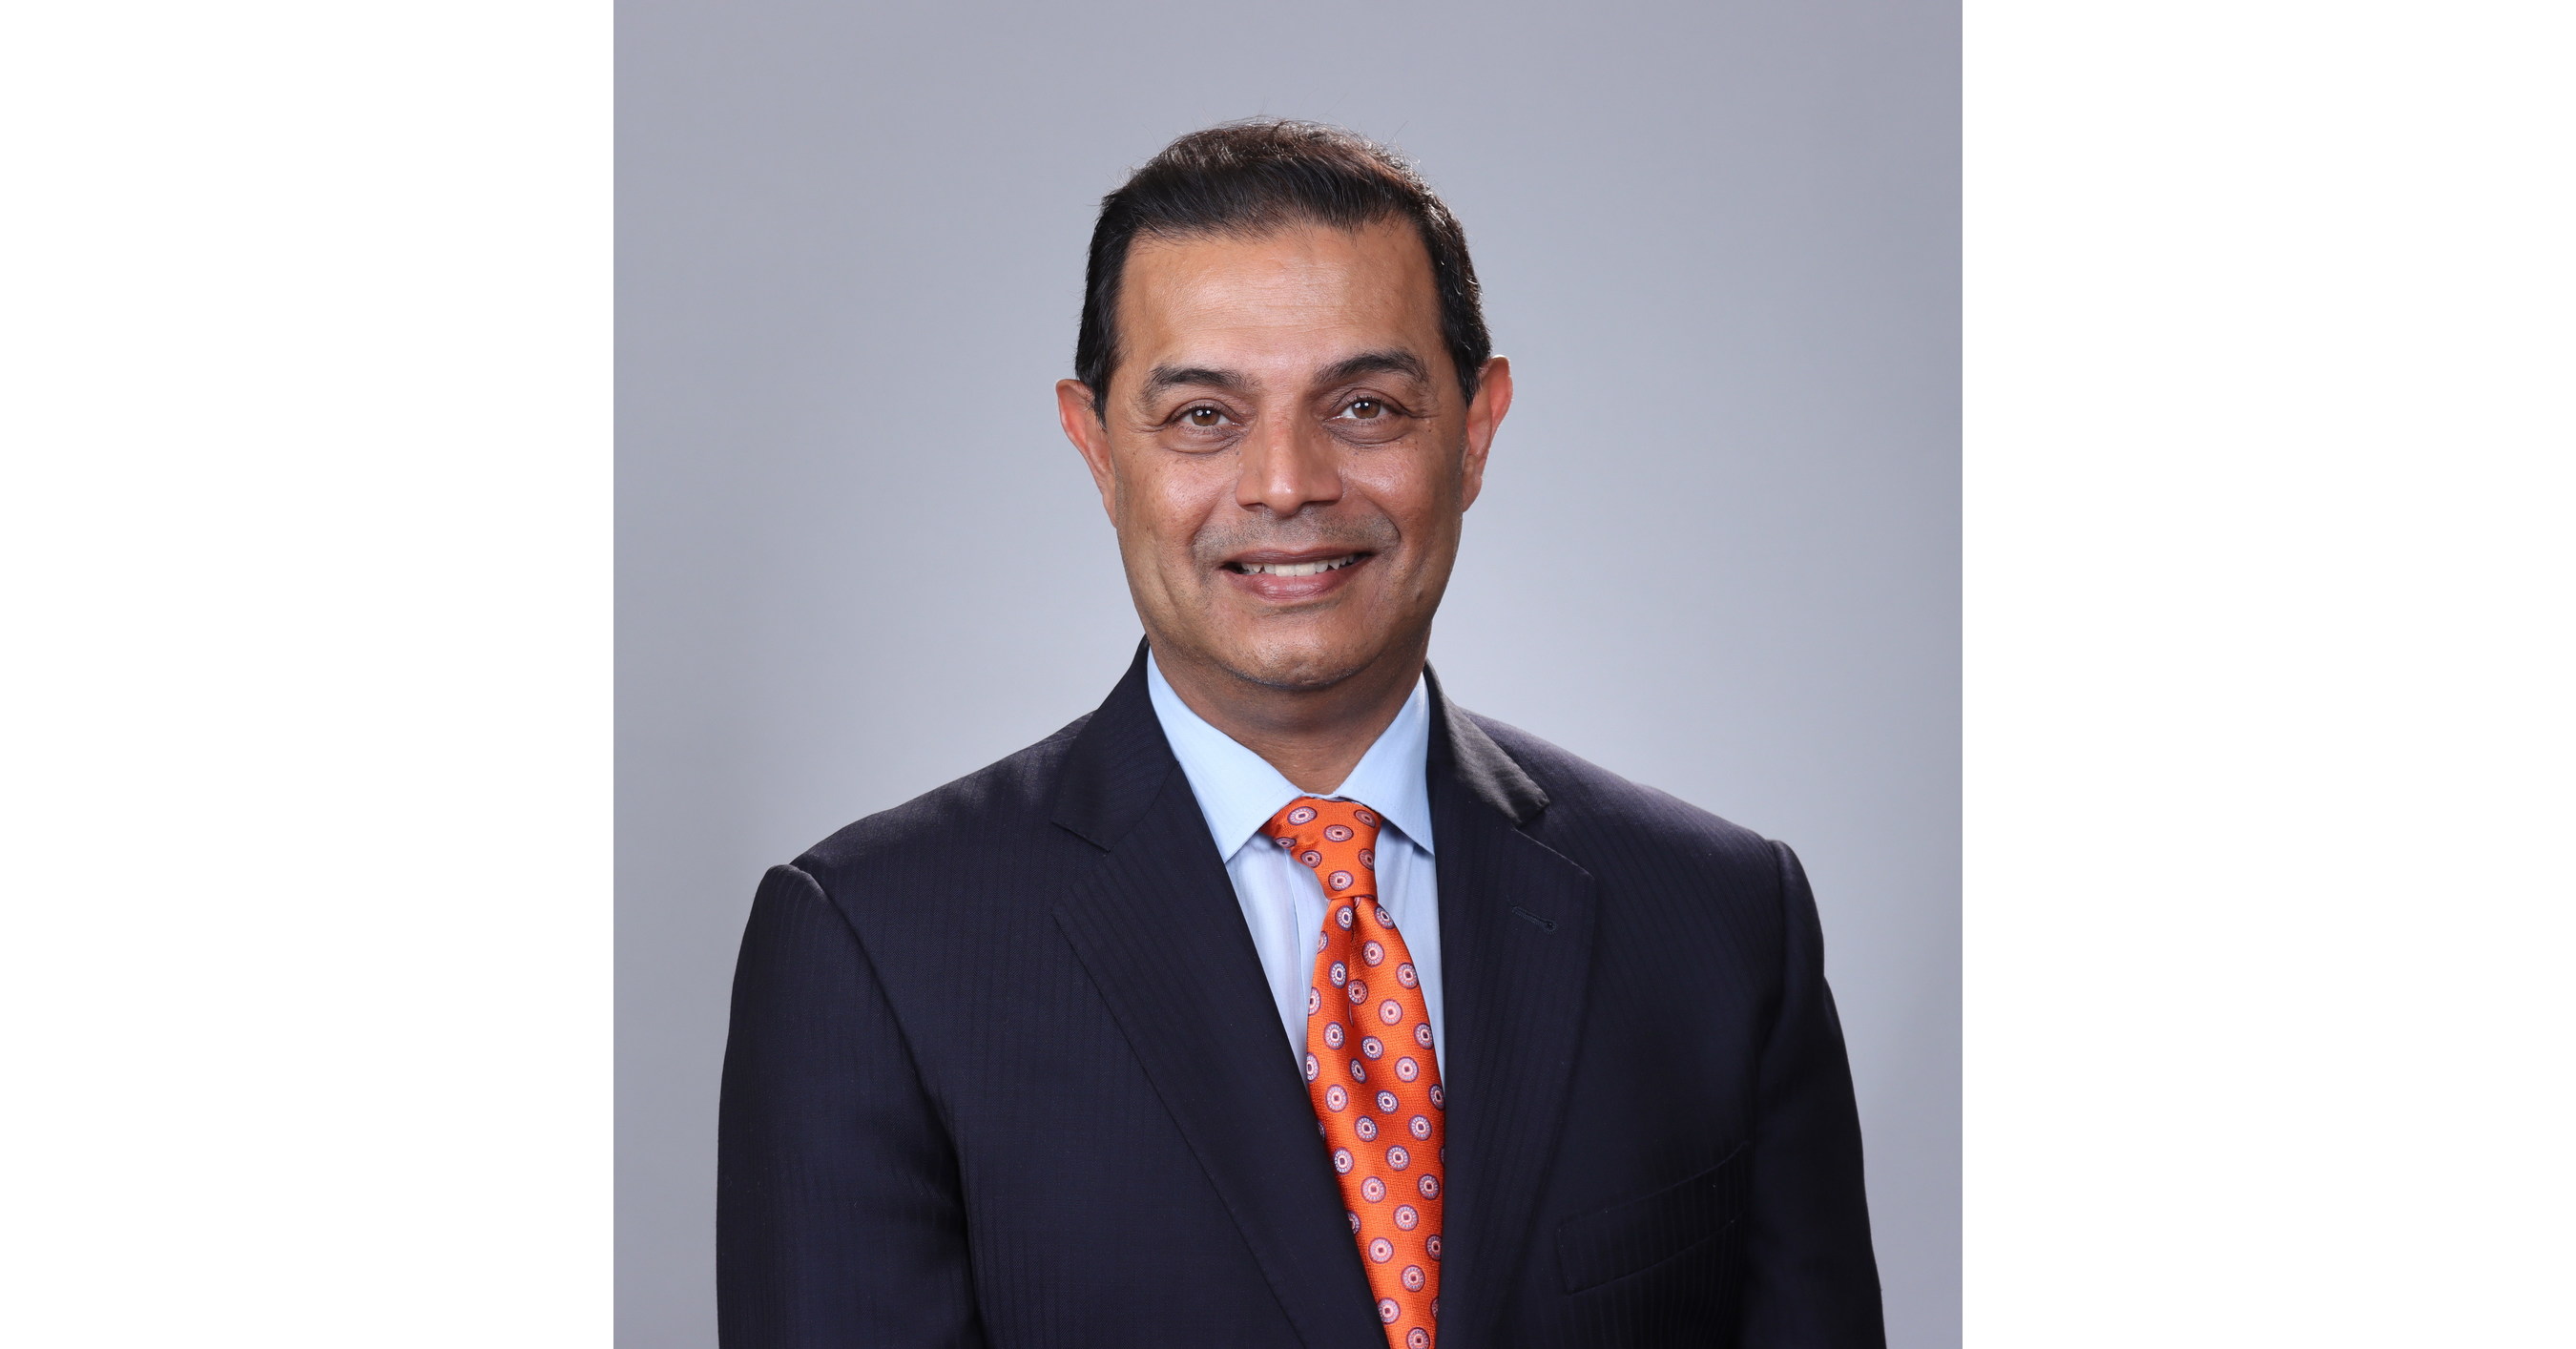 Dr. Amin Kassam to Lead NorthShore Neurological Institute at Northwest Community Healthcare